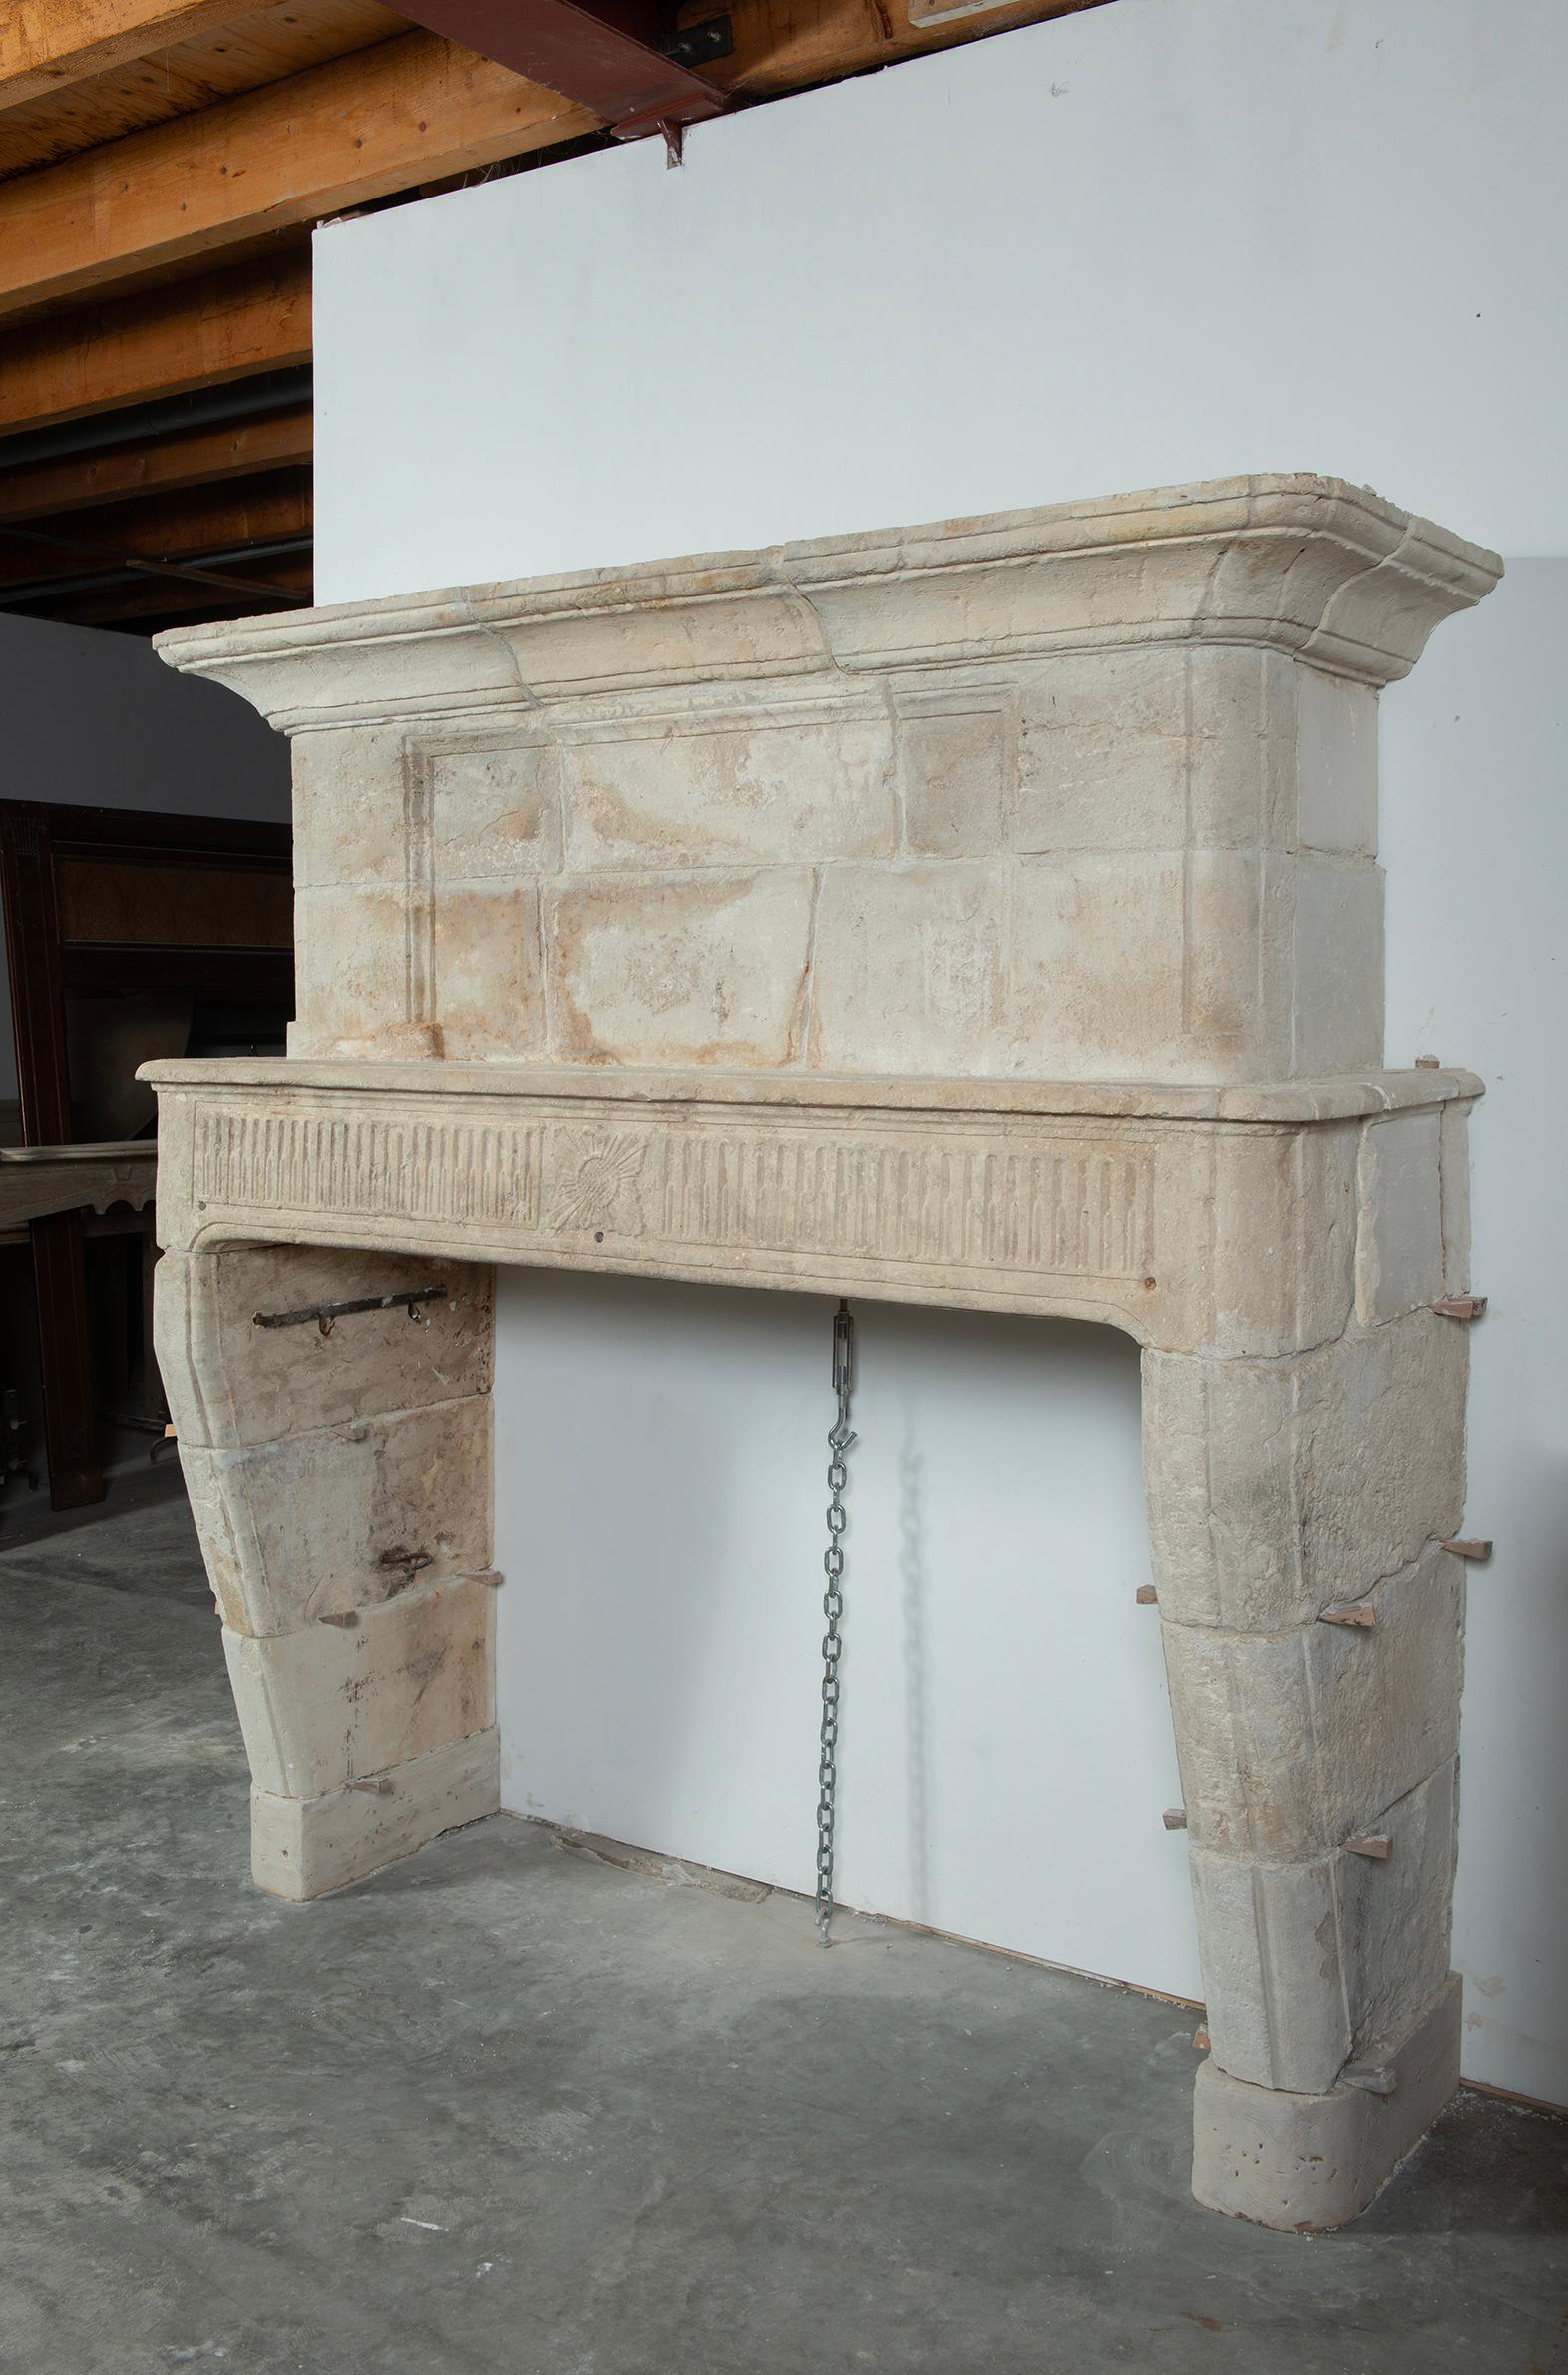 Very happy to be offering this rustic limestone trumeau fireplace mantel from the countryside of France.
This lovely seized mantel works as a show stopper in nearly any interior.
The decor, patina and material make this really stand out.

The strong